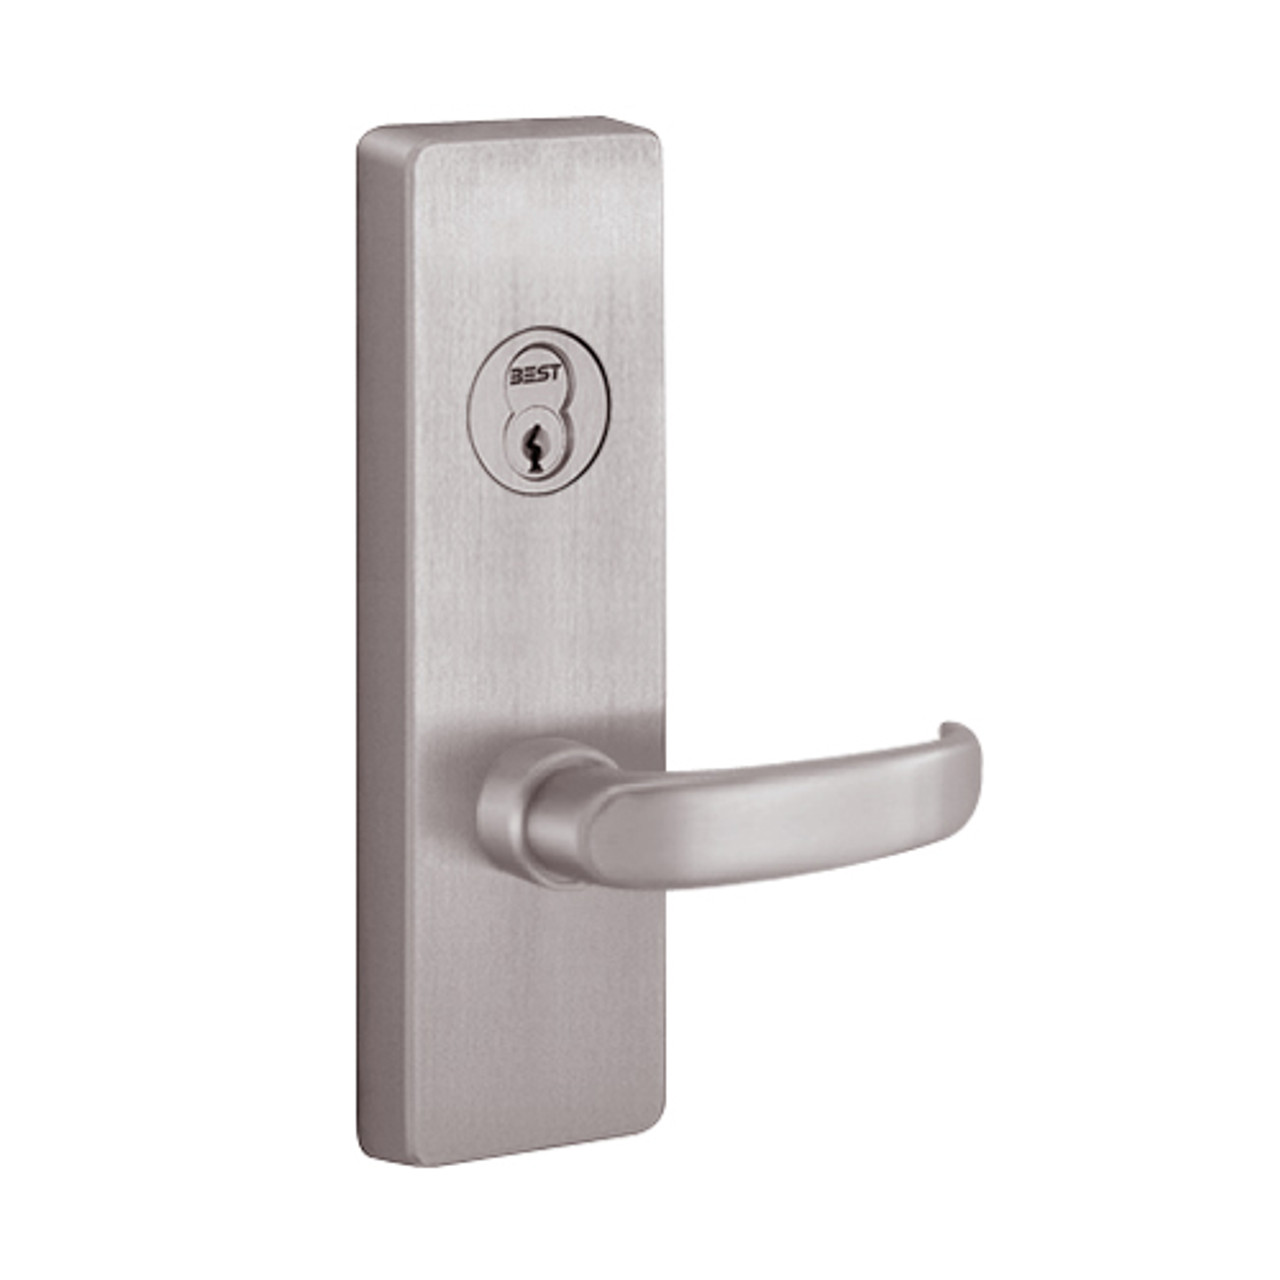 4903D-630-RHR PHI Key Retracts Latchbolt Trim with D Lever Design for Apex and Olympian Series Exit Device in Satin Stainless Steel Finish